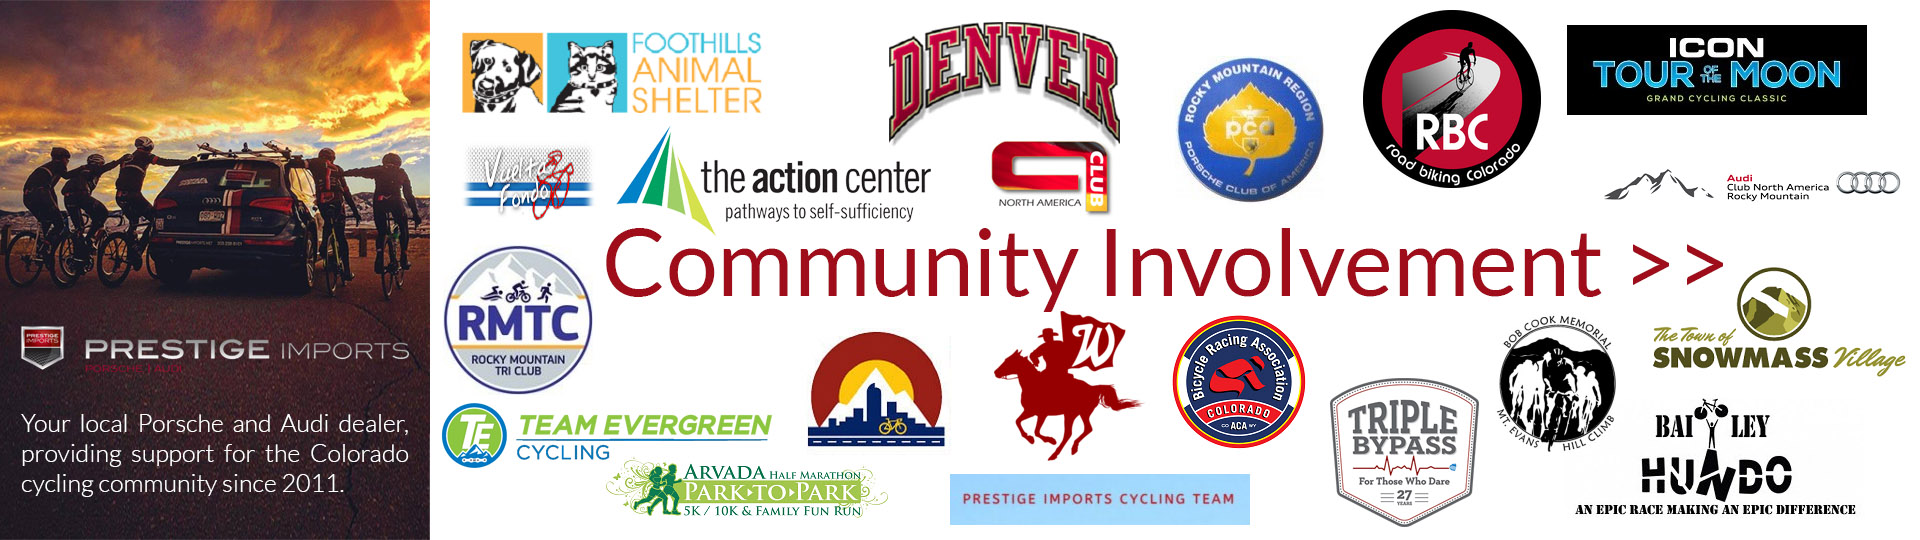 Learn about Prestige Imports activities in the Colorado Community